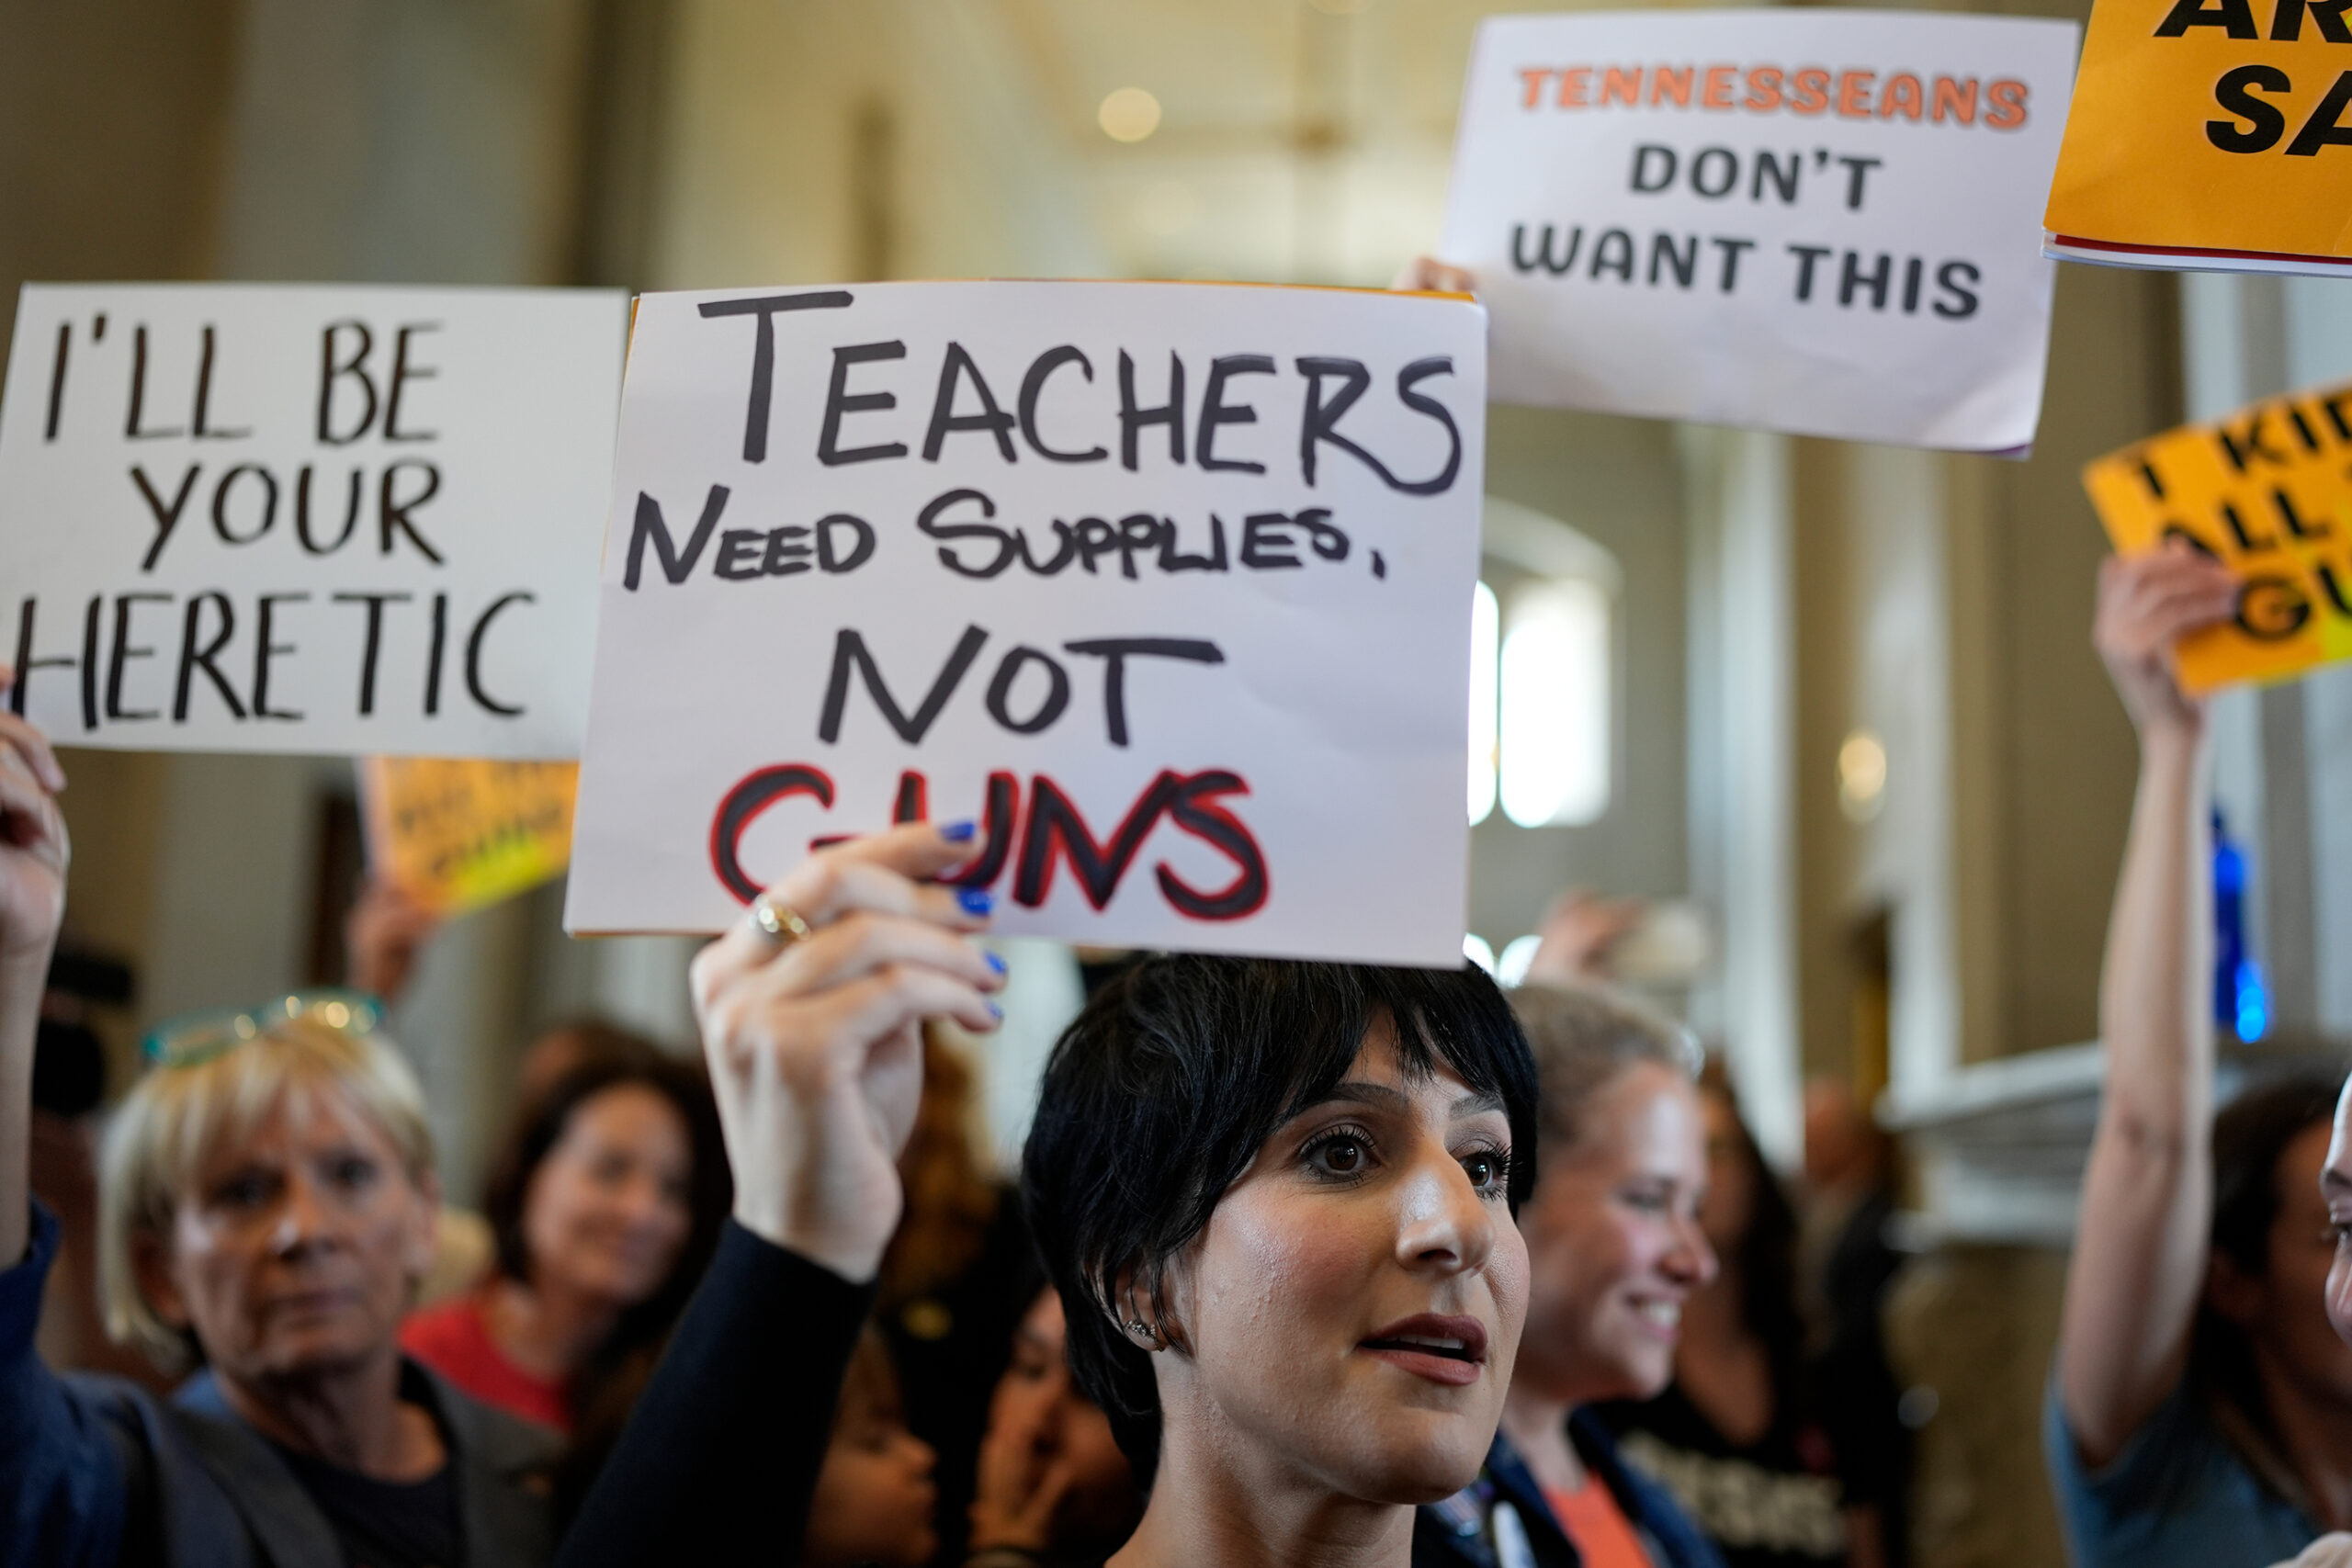 Republicans Respond to School Shootings With Bills to Arm Teachers